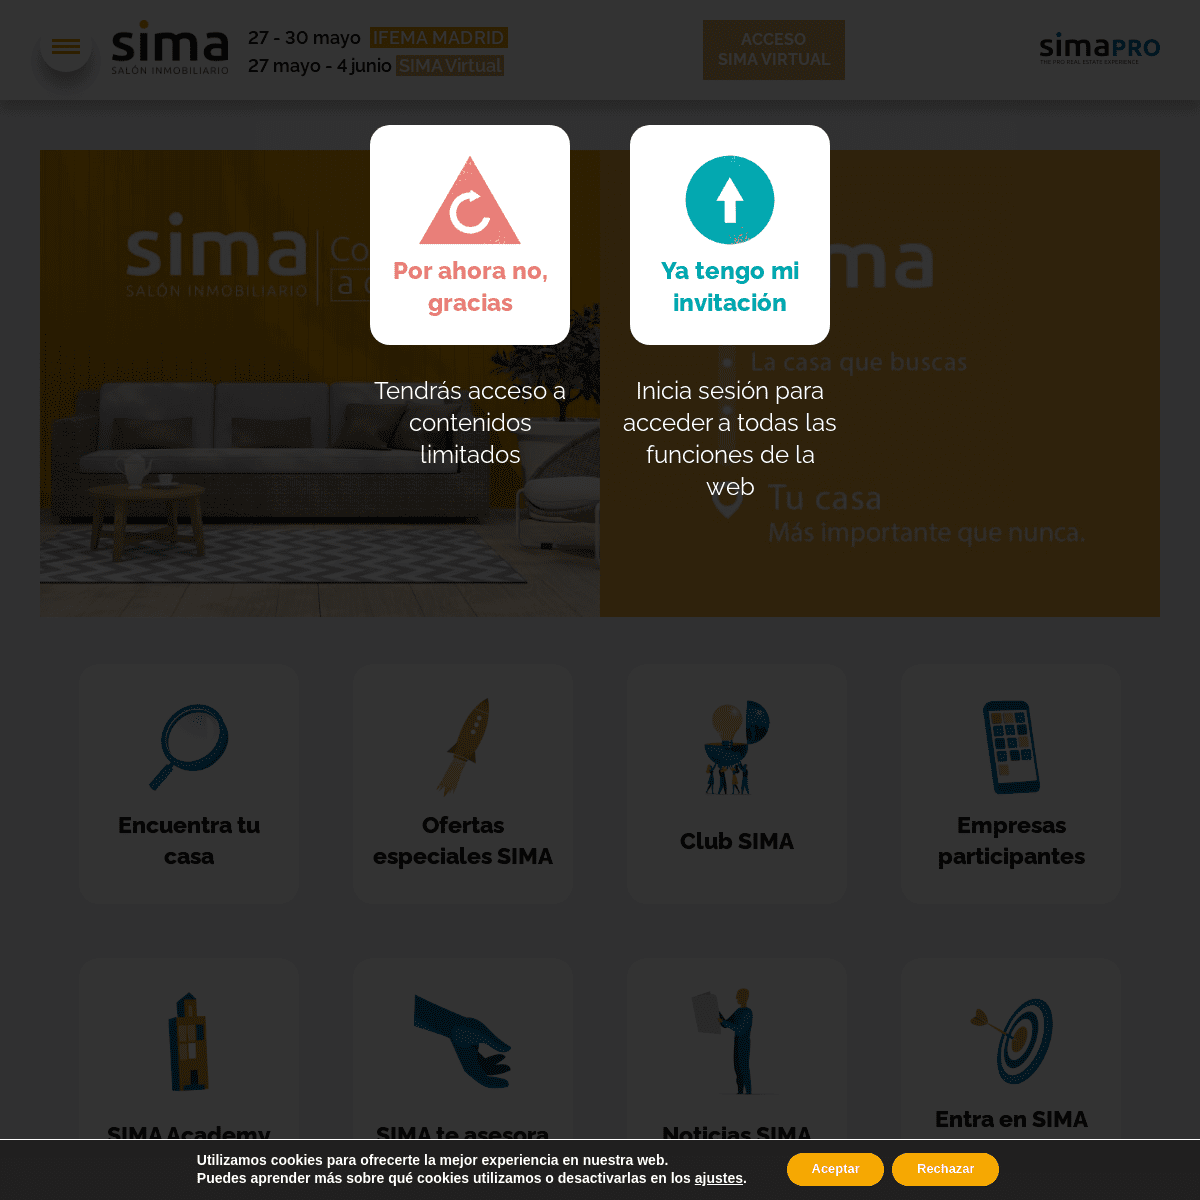 A complete backup of https://simaexpo.com